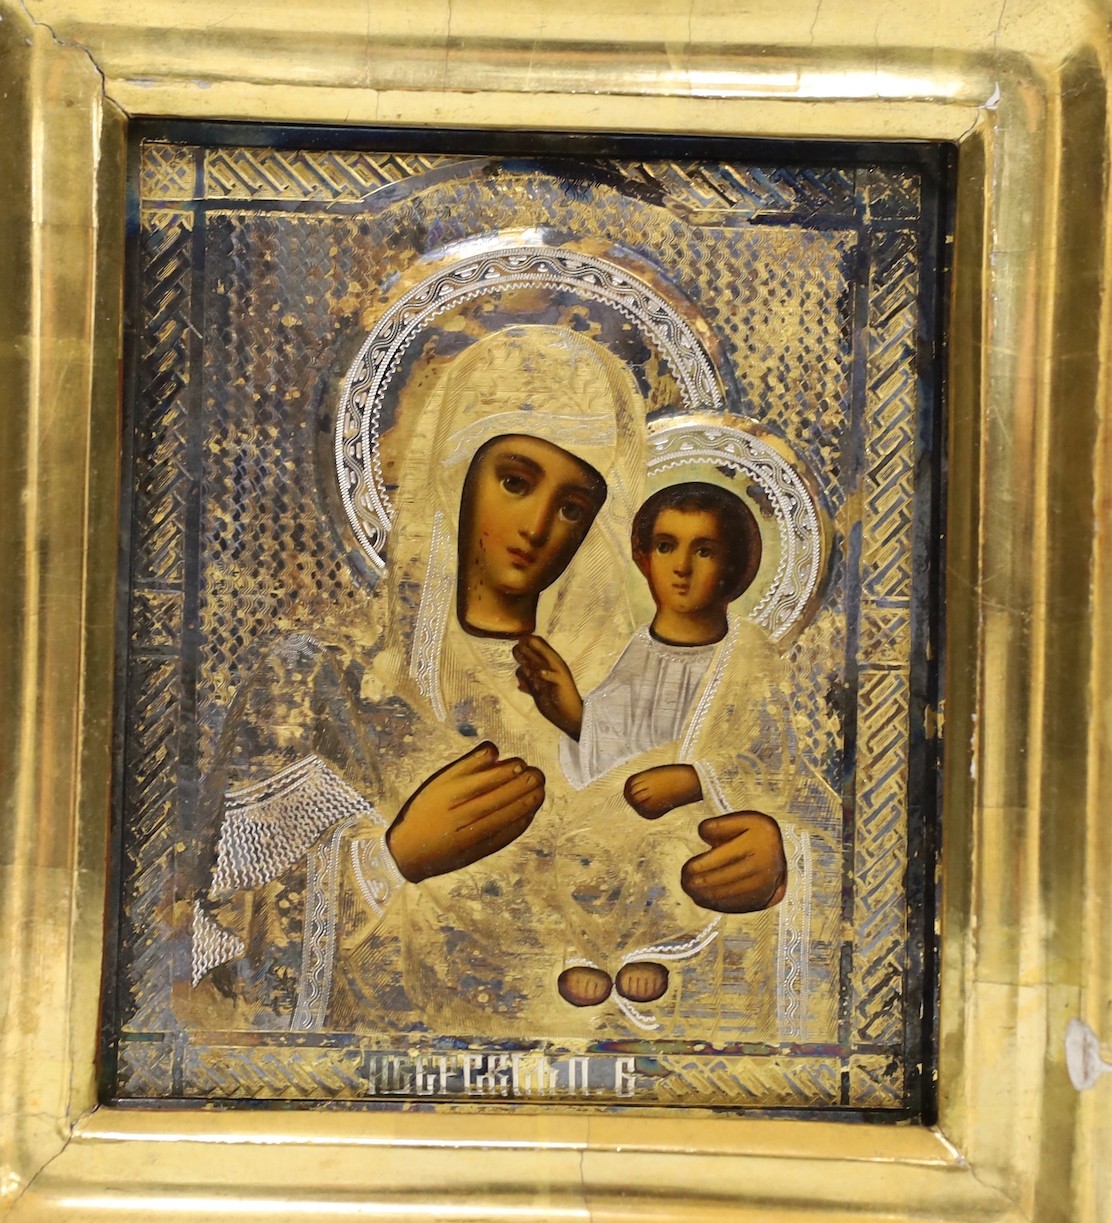 A 20th century Russian painted wood icon of Madonna and Child, with silver-gilt oklad, in gilt frame, 19.5 x 17.5cm